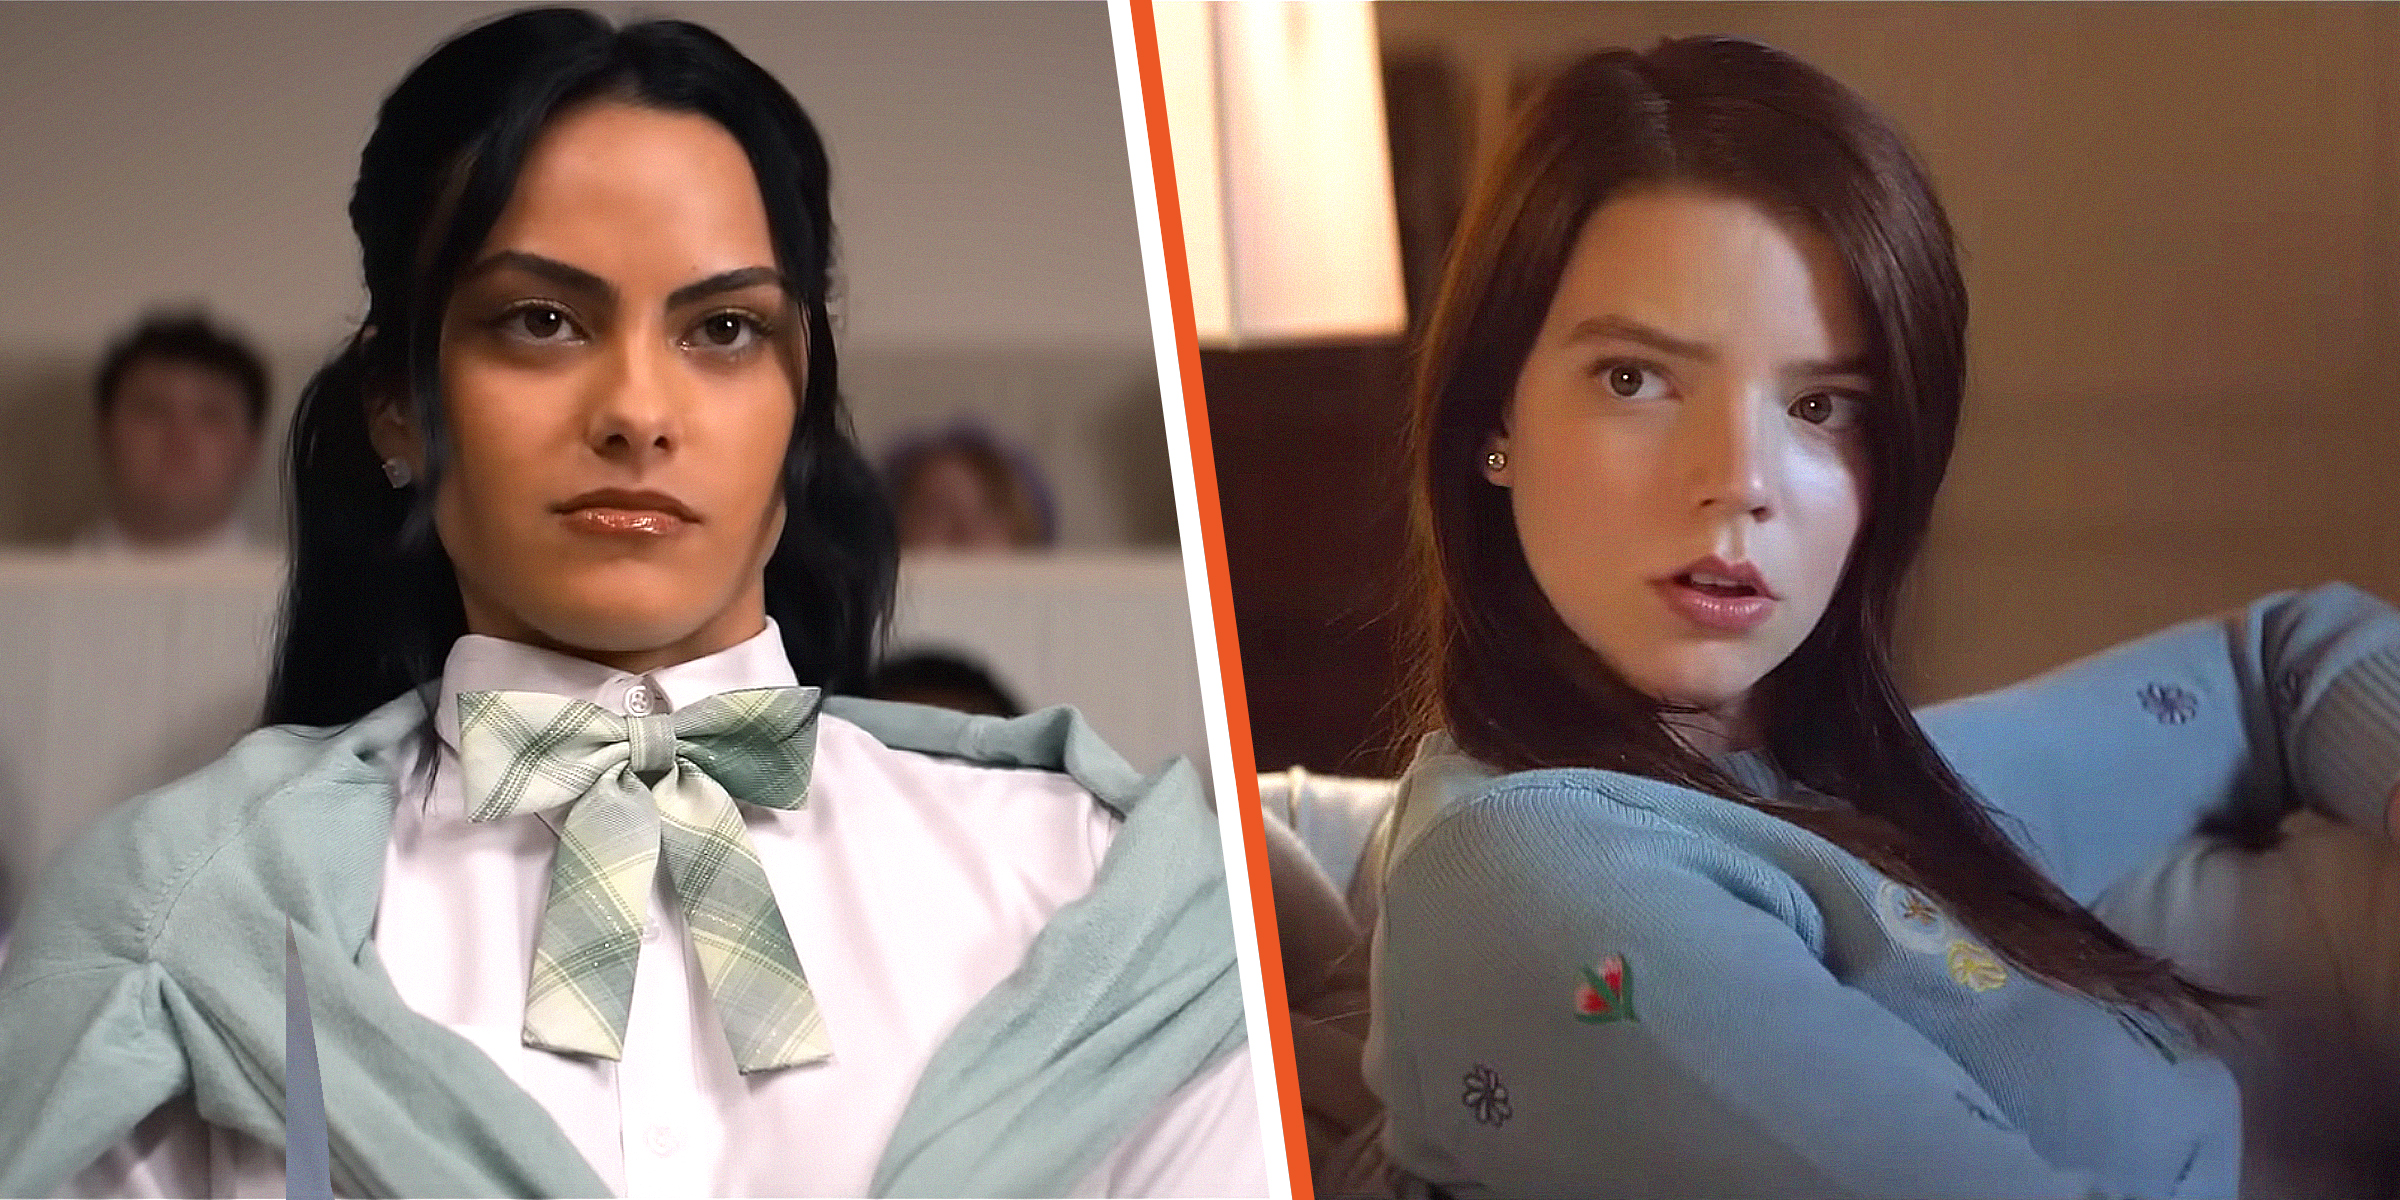 Camila Mendes in "Do Revenge" | Anya Taylor-Joy in "Thoroughbreds." | Source: YouTube/Netflix | YouTube/FocusFeatures